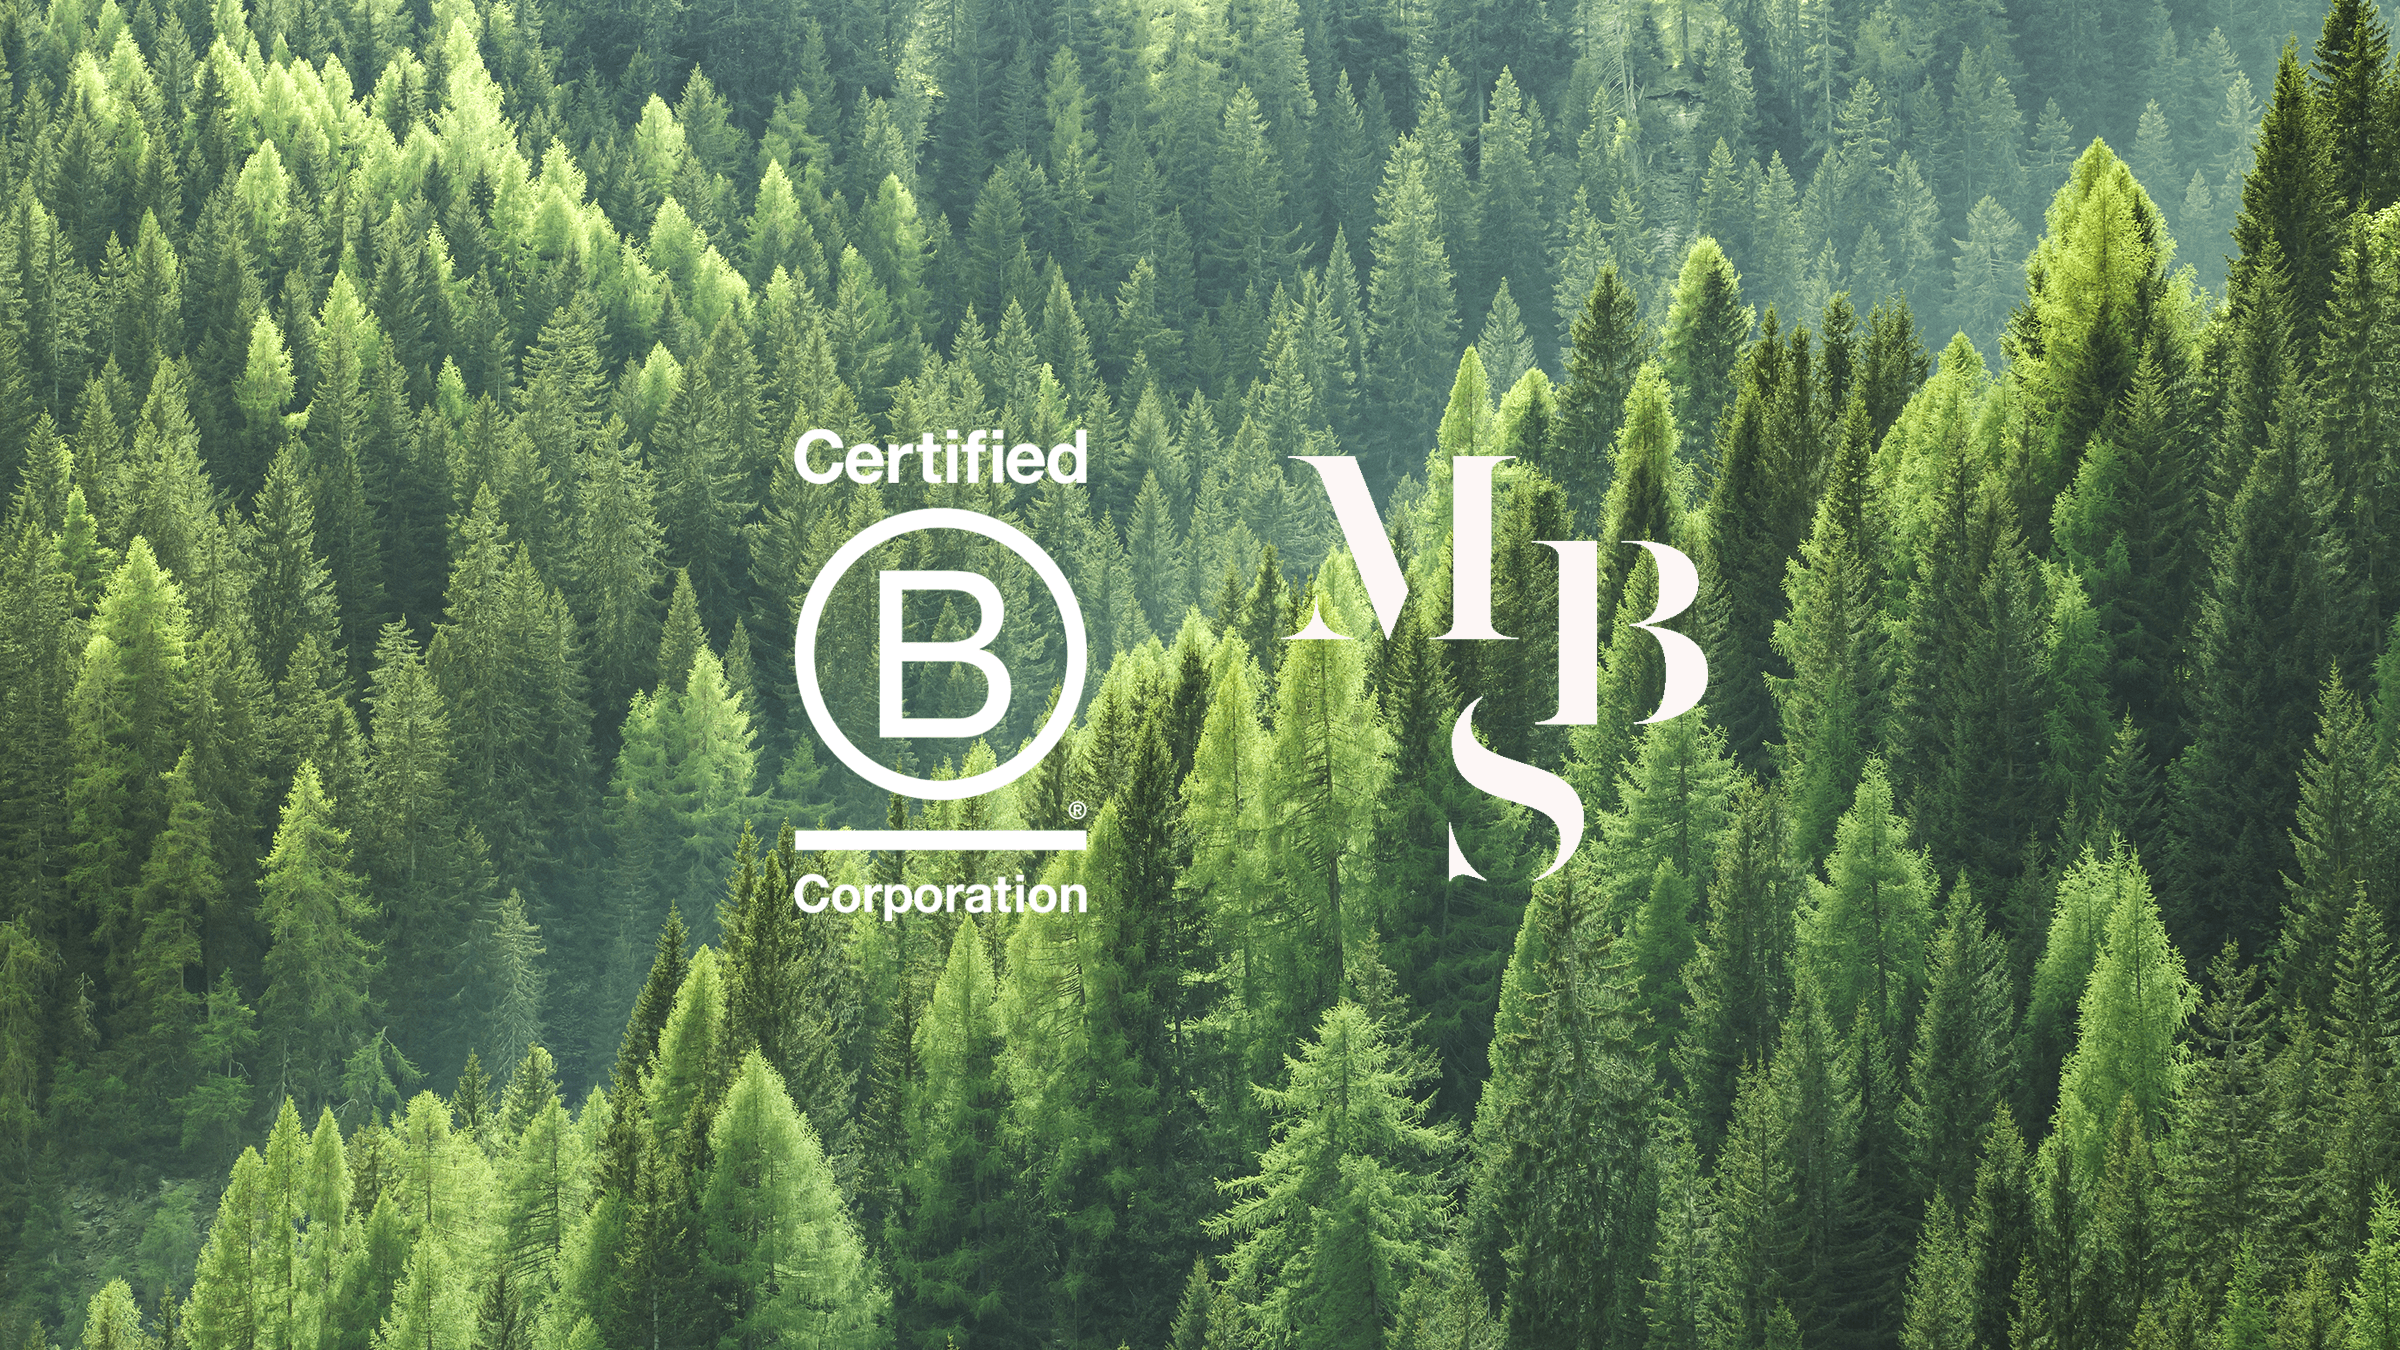 images of the mbs logo and b corp logo in front of a pine forest